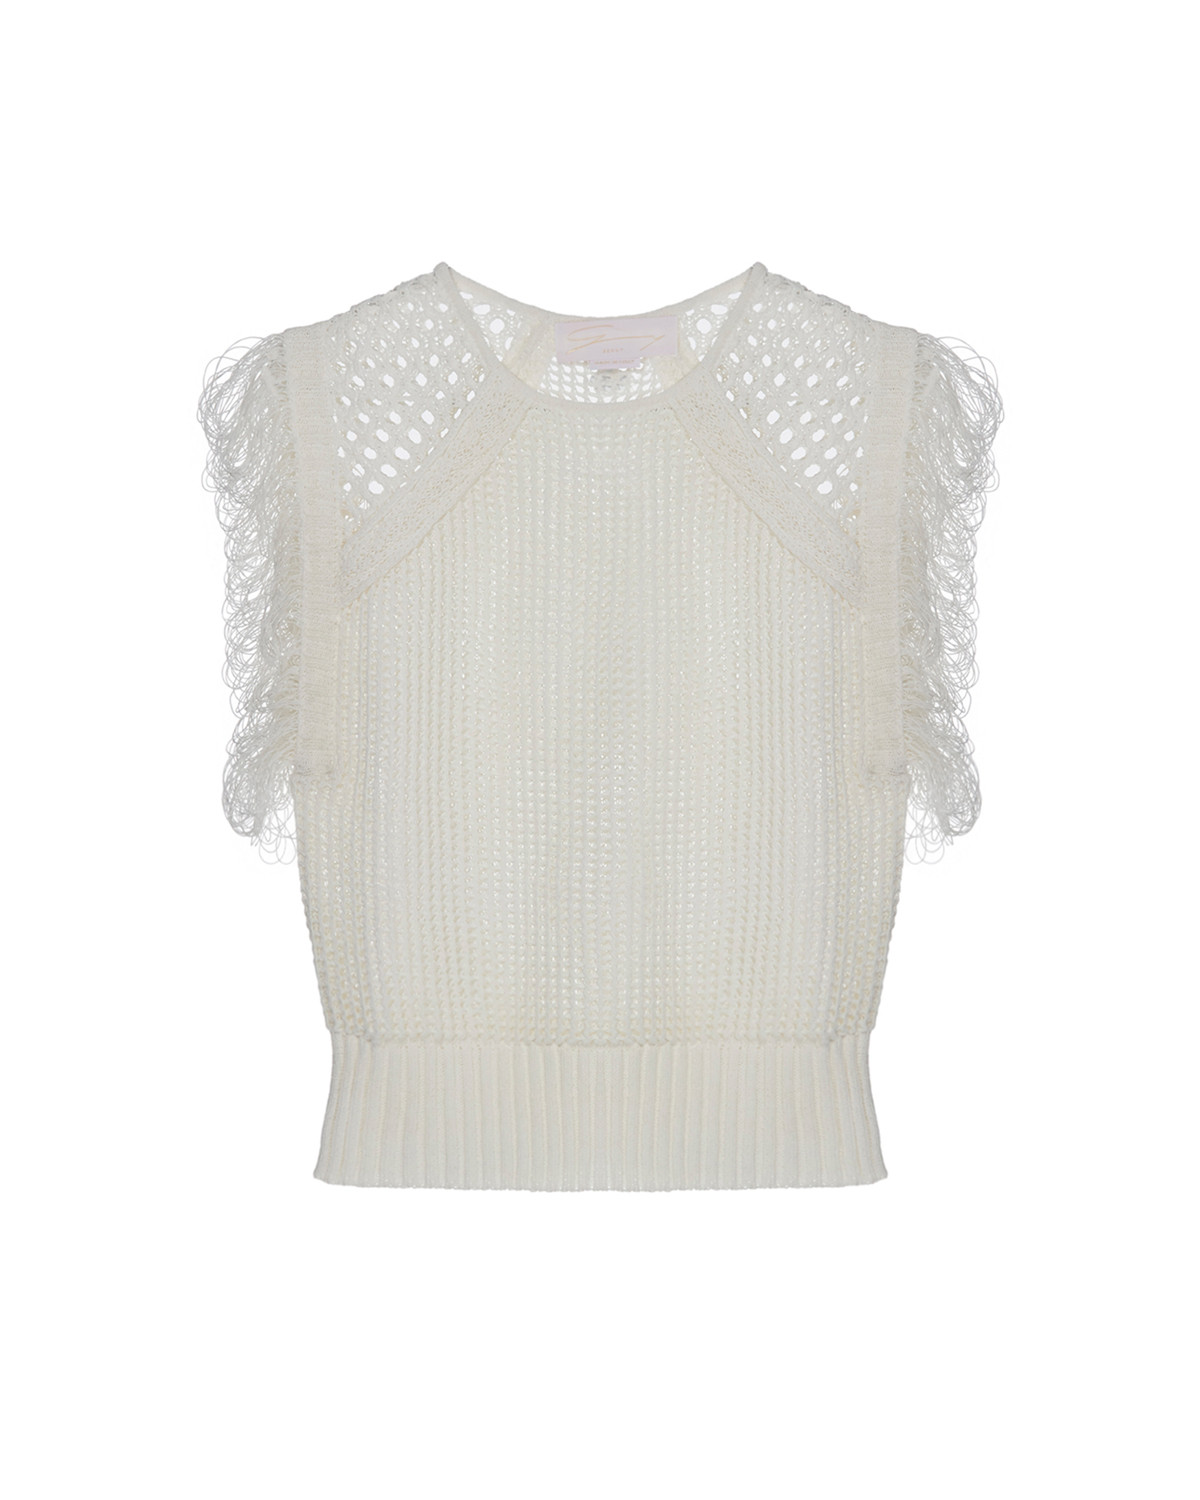 Knit top with fringe